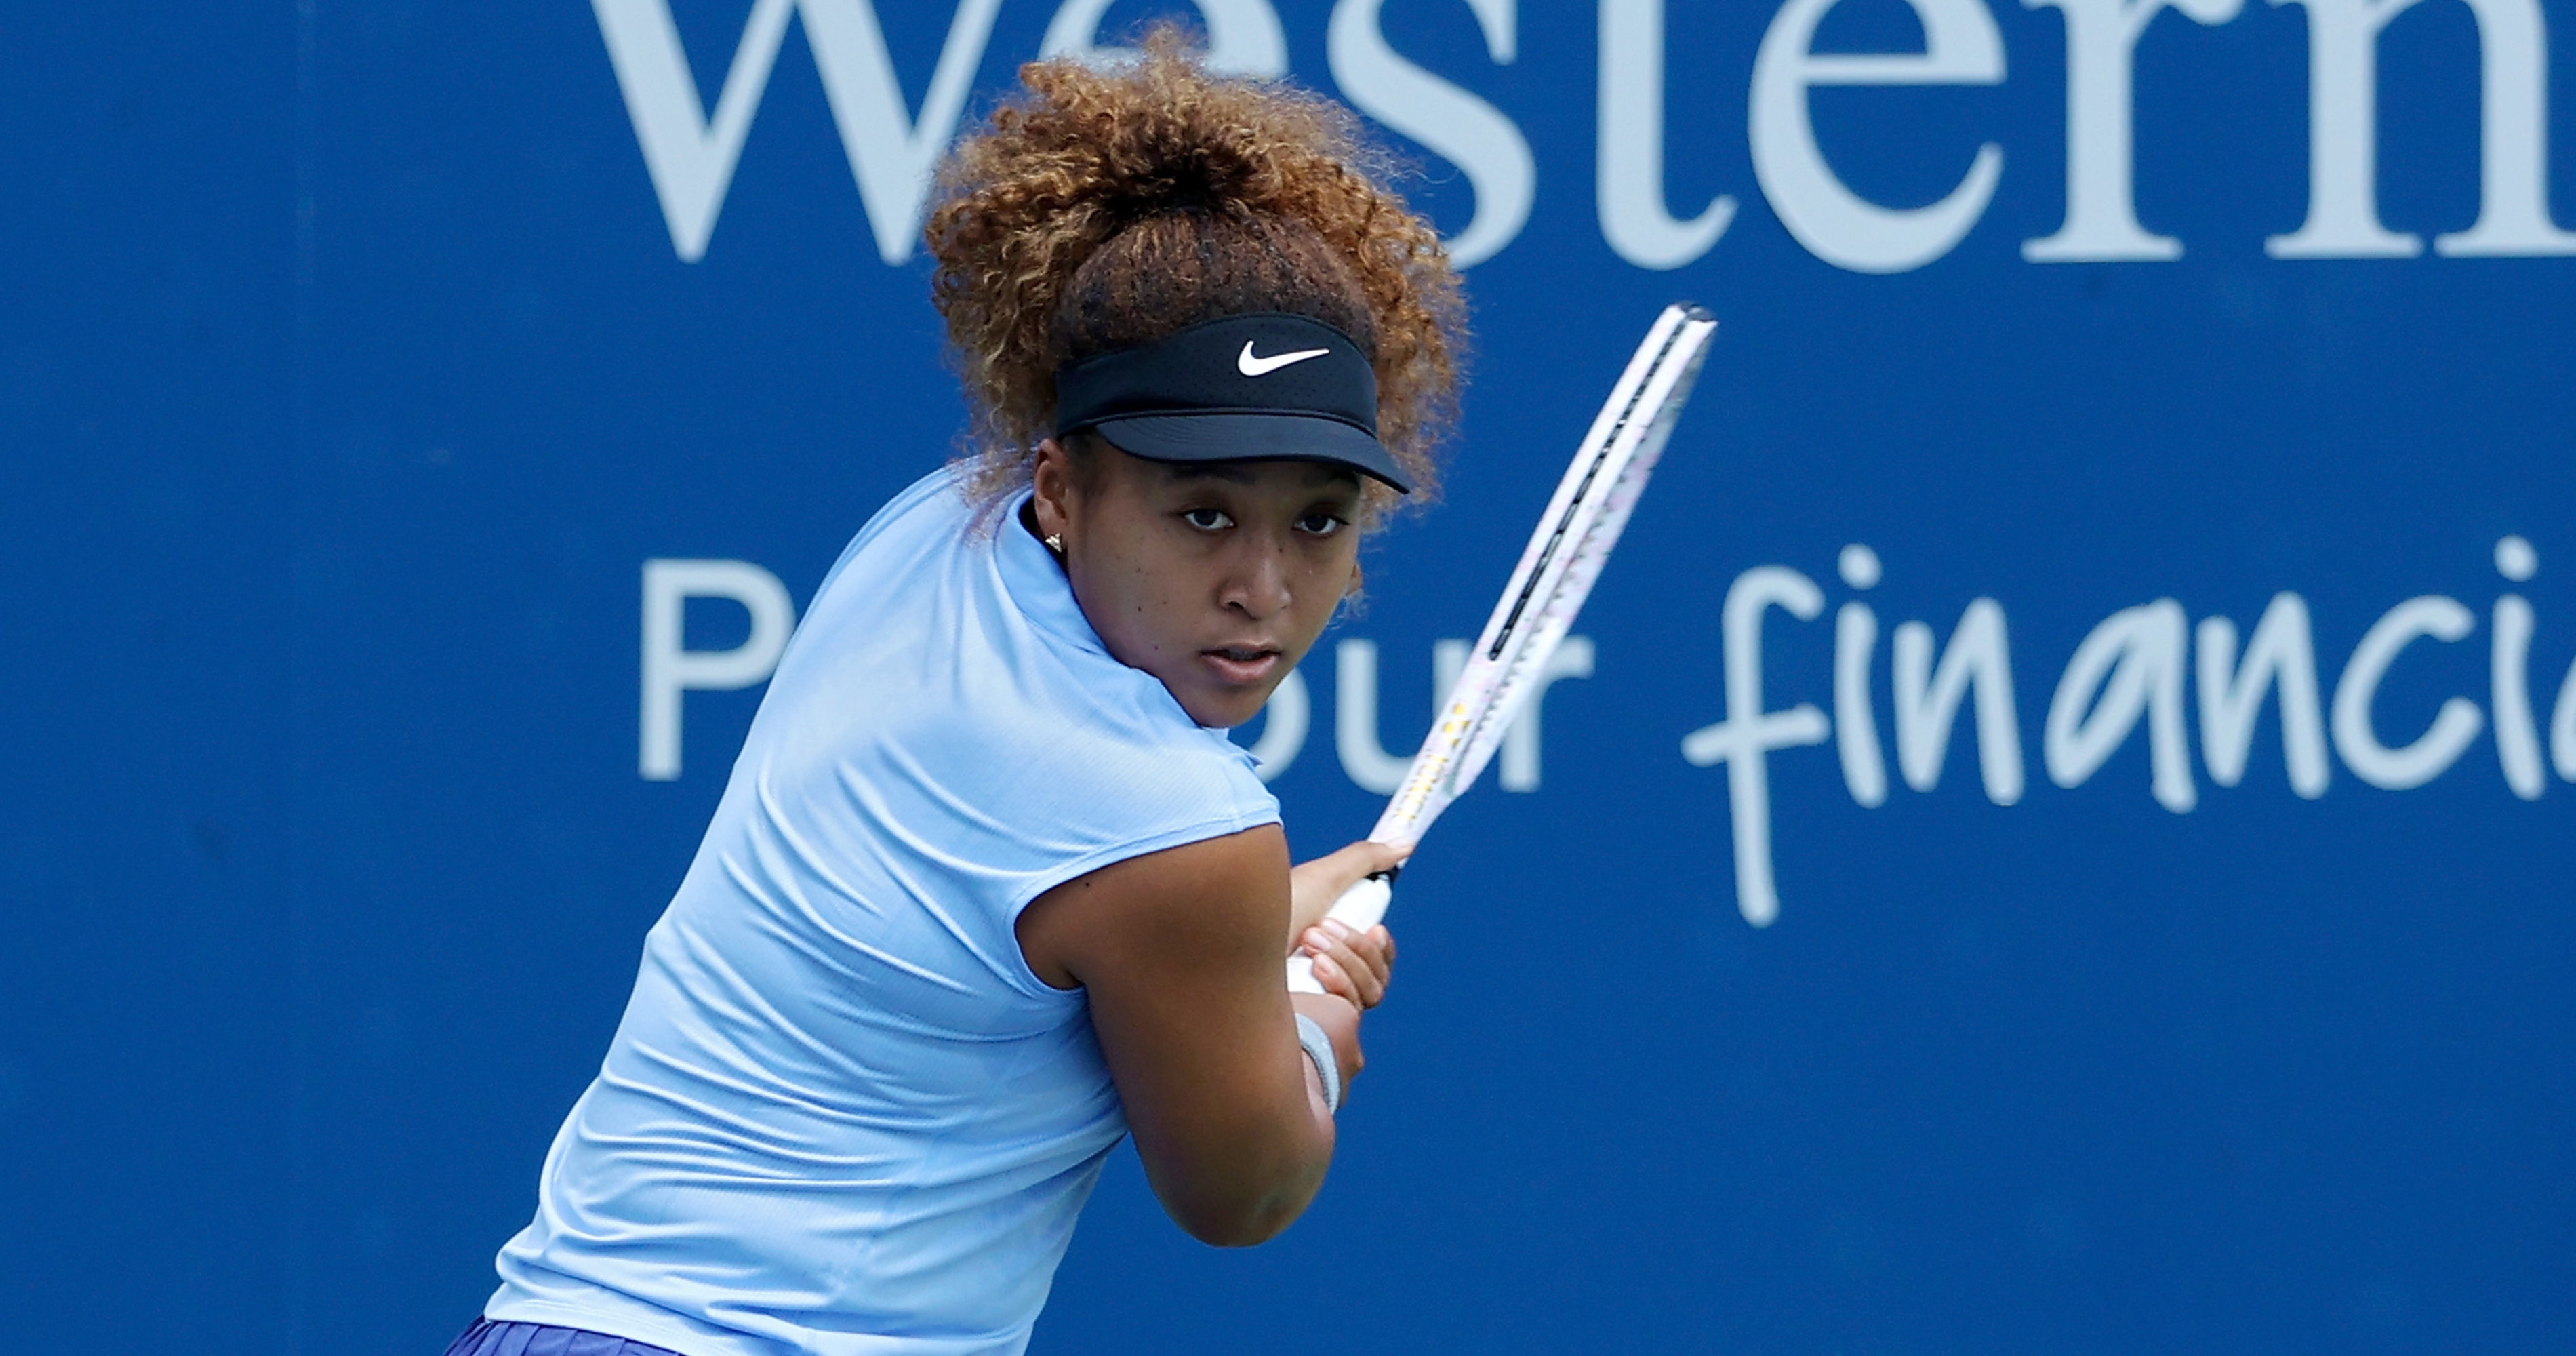 Western and Southern Open 2021 Osaka, Medvedev Wins Highlight Wednesdays Results News, Scores, Highlights, Stats, and Rumors Bleacher Report